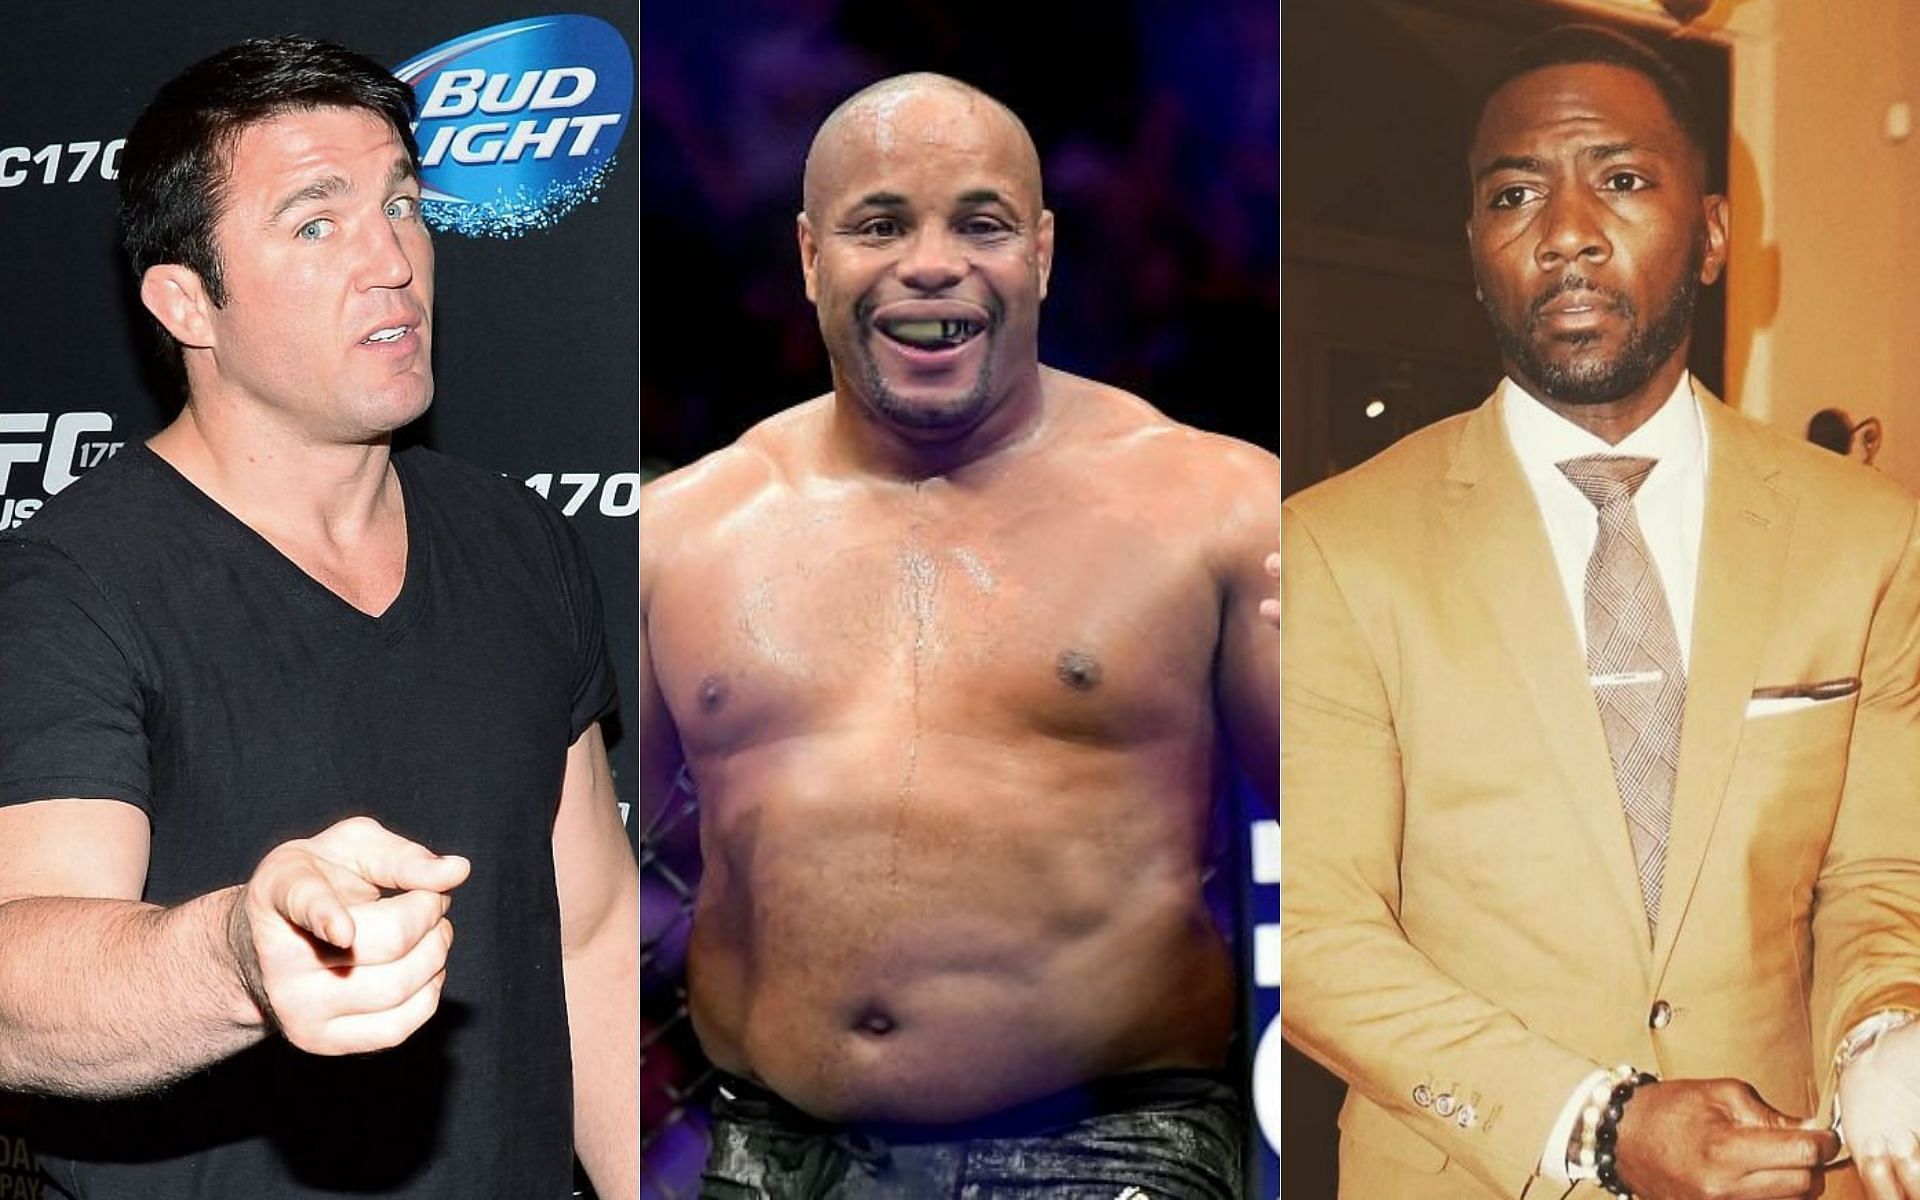 Chael Sonnen (left), Daniel Cormier (middle) and Ryan Clark (right) [Image credits: @realclark on Instagram]